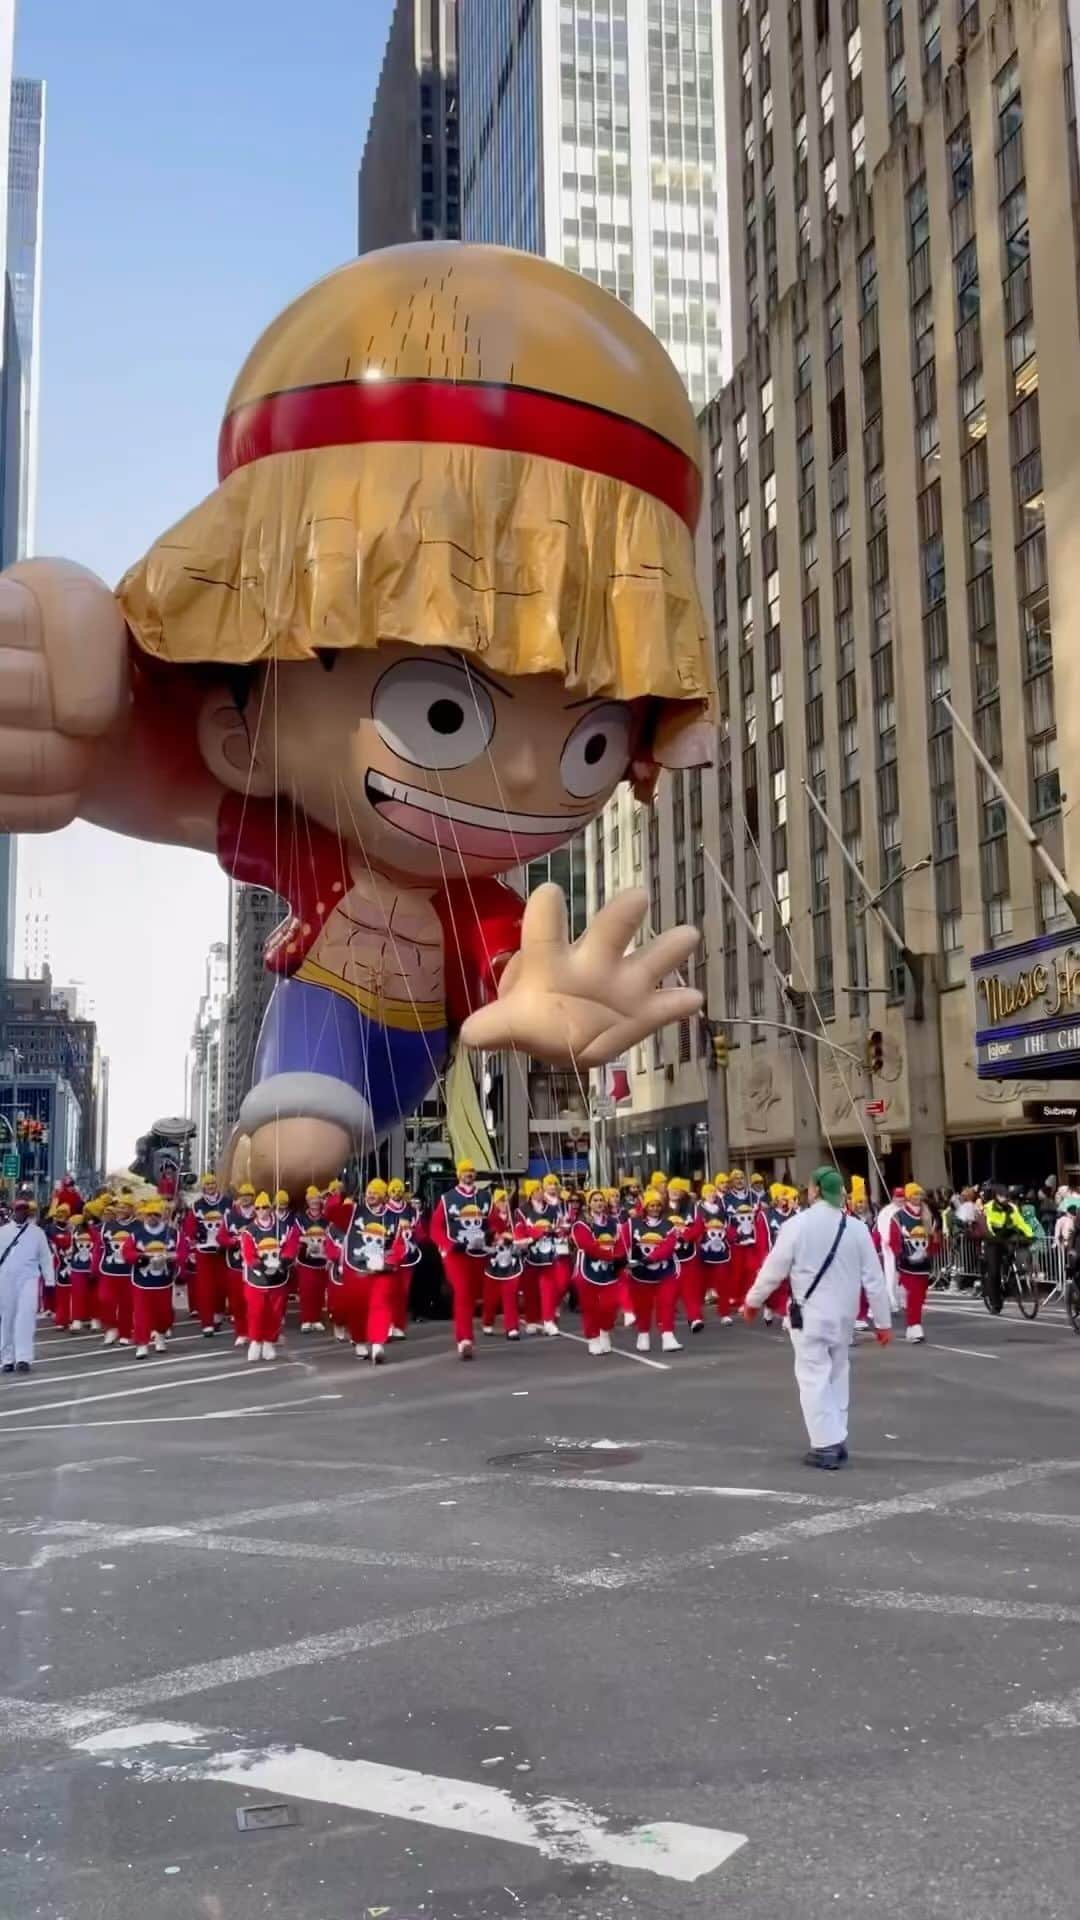 Earth Picsのインスタグラム：「@toei_animation did you watch the Macy’s parade this year? For those who don’t know what the Macy parade is;   The Macy’s Thanksgiving Day Parade is a beloved annual event in New York City, known for its grand scale and festive spirit. It started in 1924, making it one of the oldest Thanksgiving parades in the United States. The parade was initiated by employees of Macy’s department store to celebrate the holiday season, and it featured floats, professional bands, and live animals borrowed from the Central Park Zoo.   Over the years, the parade has grown significantly in size and spectacle. It’s famous for its giant helium balloons, which debuted in 1927, replacing the live animals. These balloons often take the shape of popular cultural characters and are a hallmark of the event. The parade also includes elaborate floats, marching bands, musical performances, and theatrical presentations, drawing millions of spectators on the streets of New York and even more viewers watching the broadcast nationwide. The Macy’s Thanksgiving Day Parade has become a cherished tradition, marking the start of the holiday season in the U.S. and continuing to captivate audiences with its joyful celebration.  Via 🎥: @toei_animation  📍 NYC 🇺🇸」